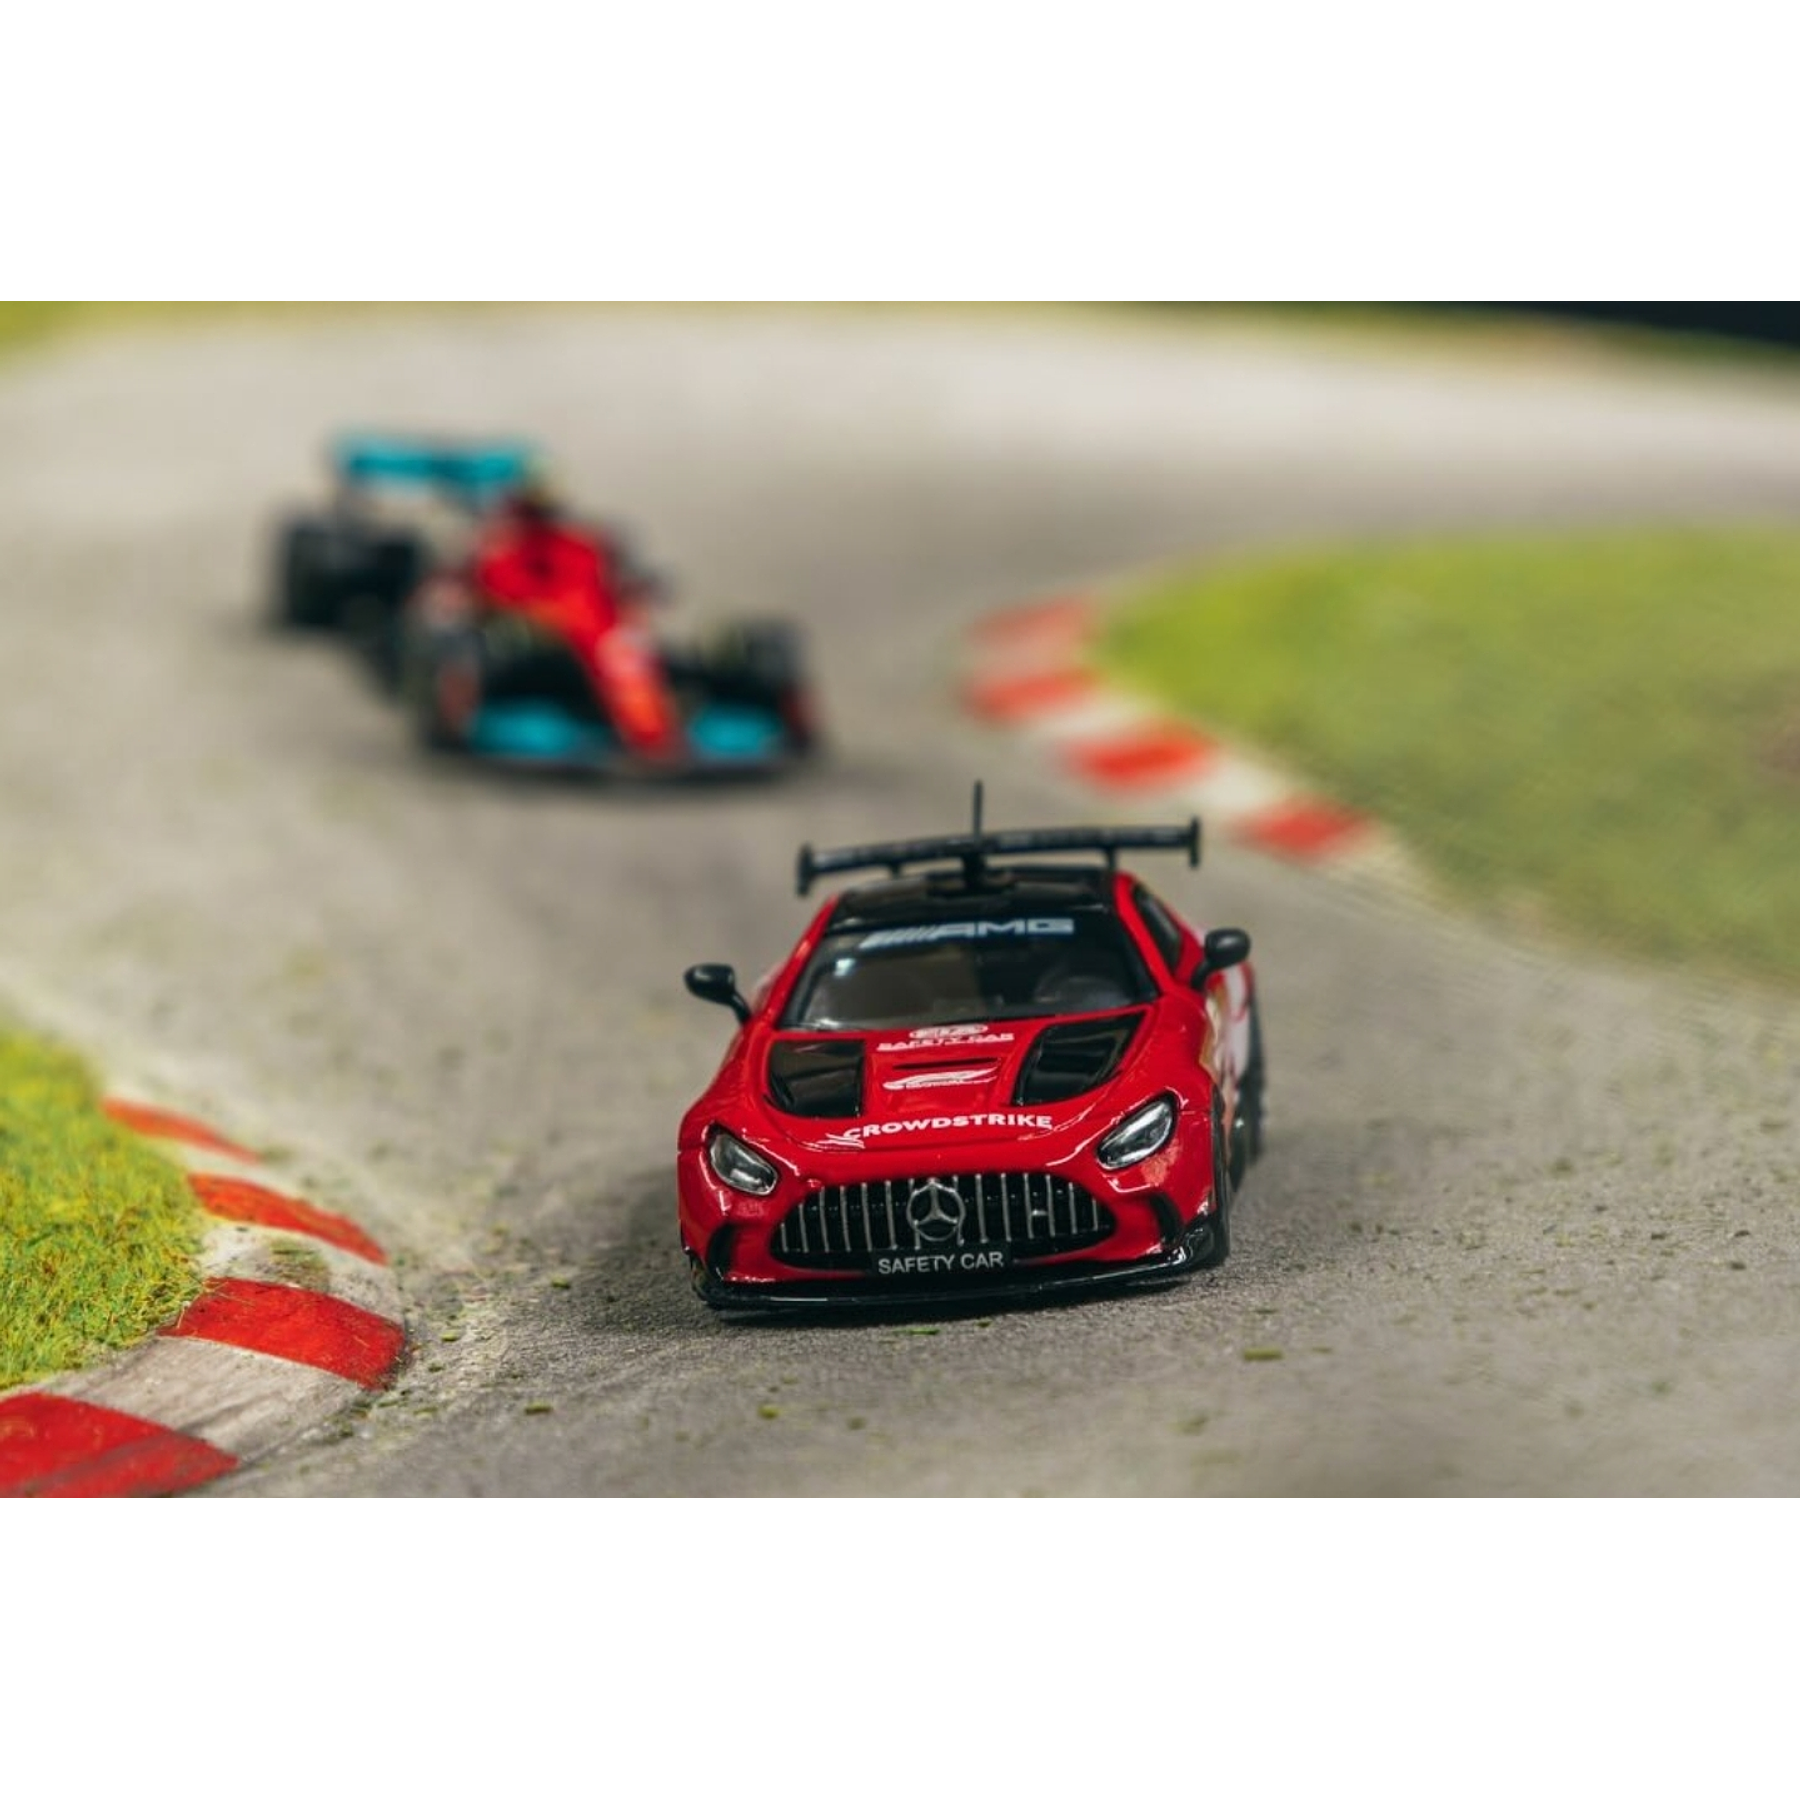 PREVENTA Tarmac Works 1:64 Mercedes-Benz AMG GT Black Series Safety Car- Red- Global64 – Mijo Exclusives